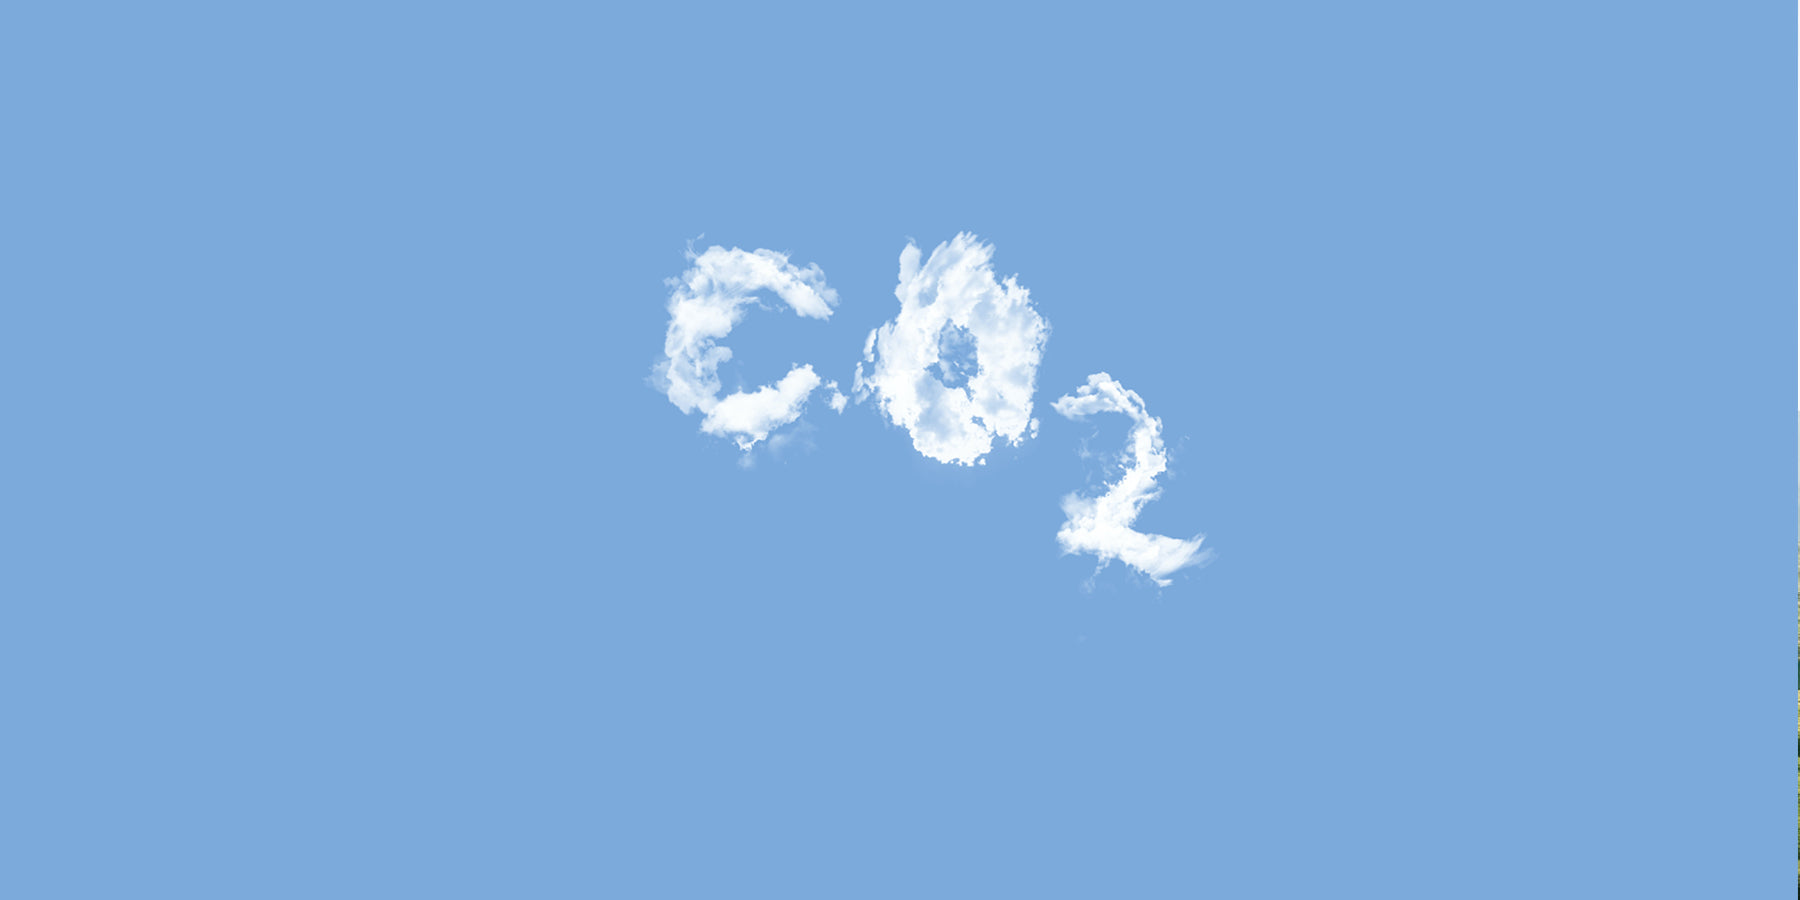 A cloud with the word CO2 written on it, representing the presence of carbon dioxide in the atmosphere.